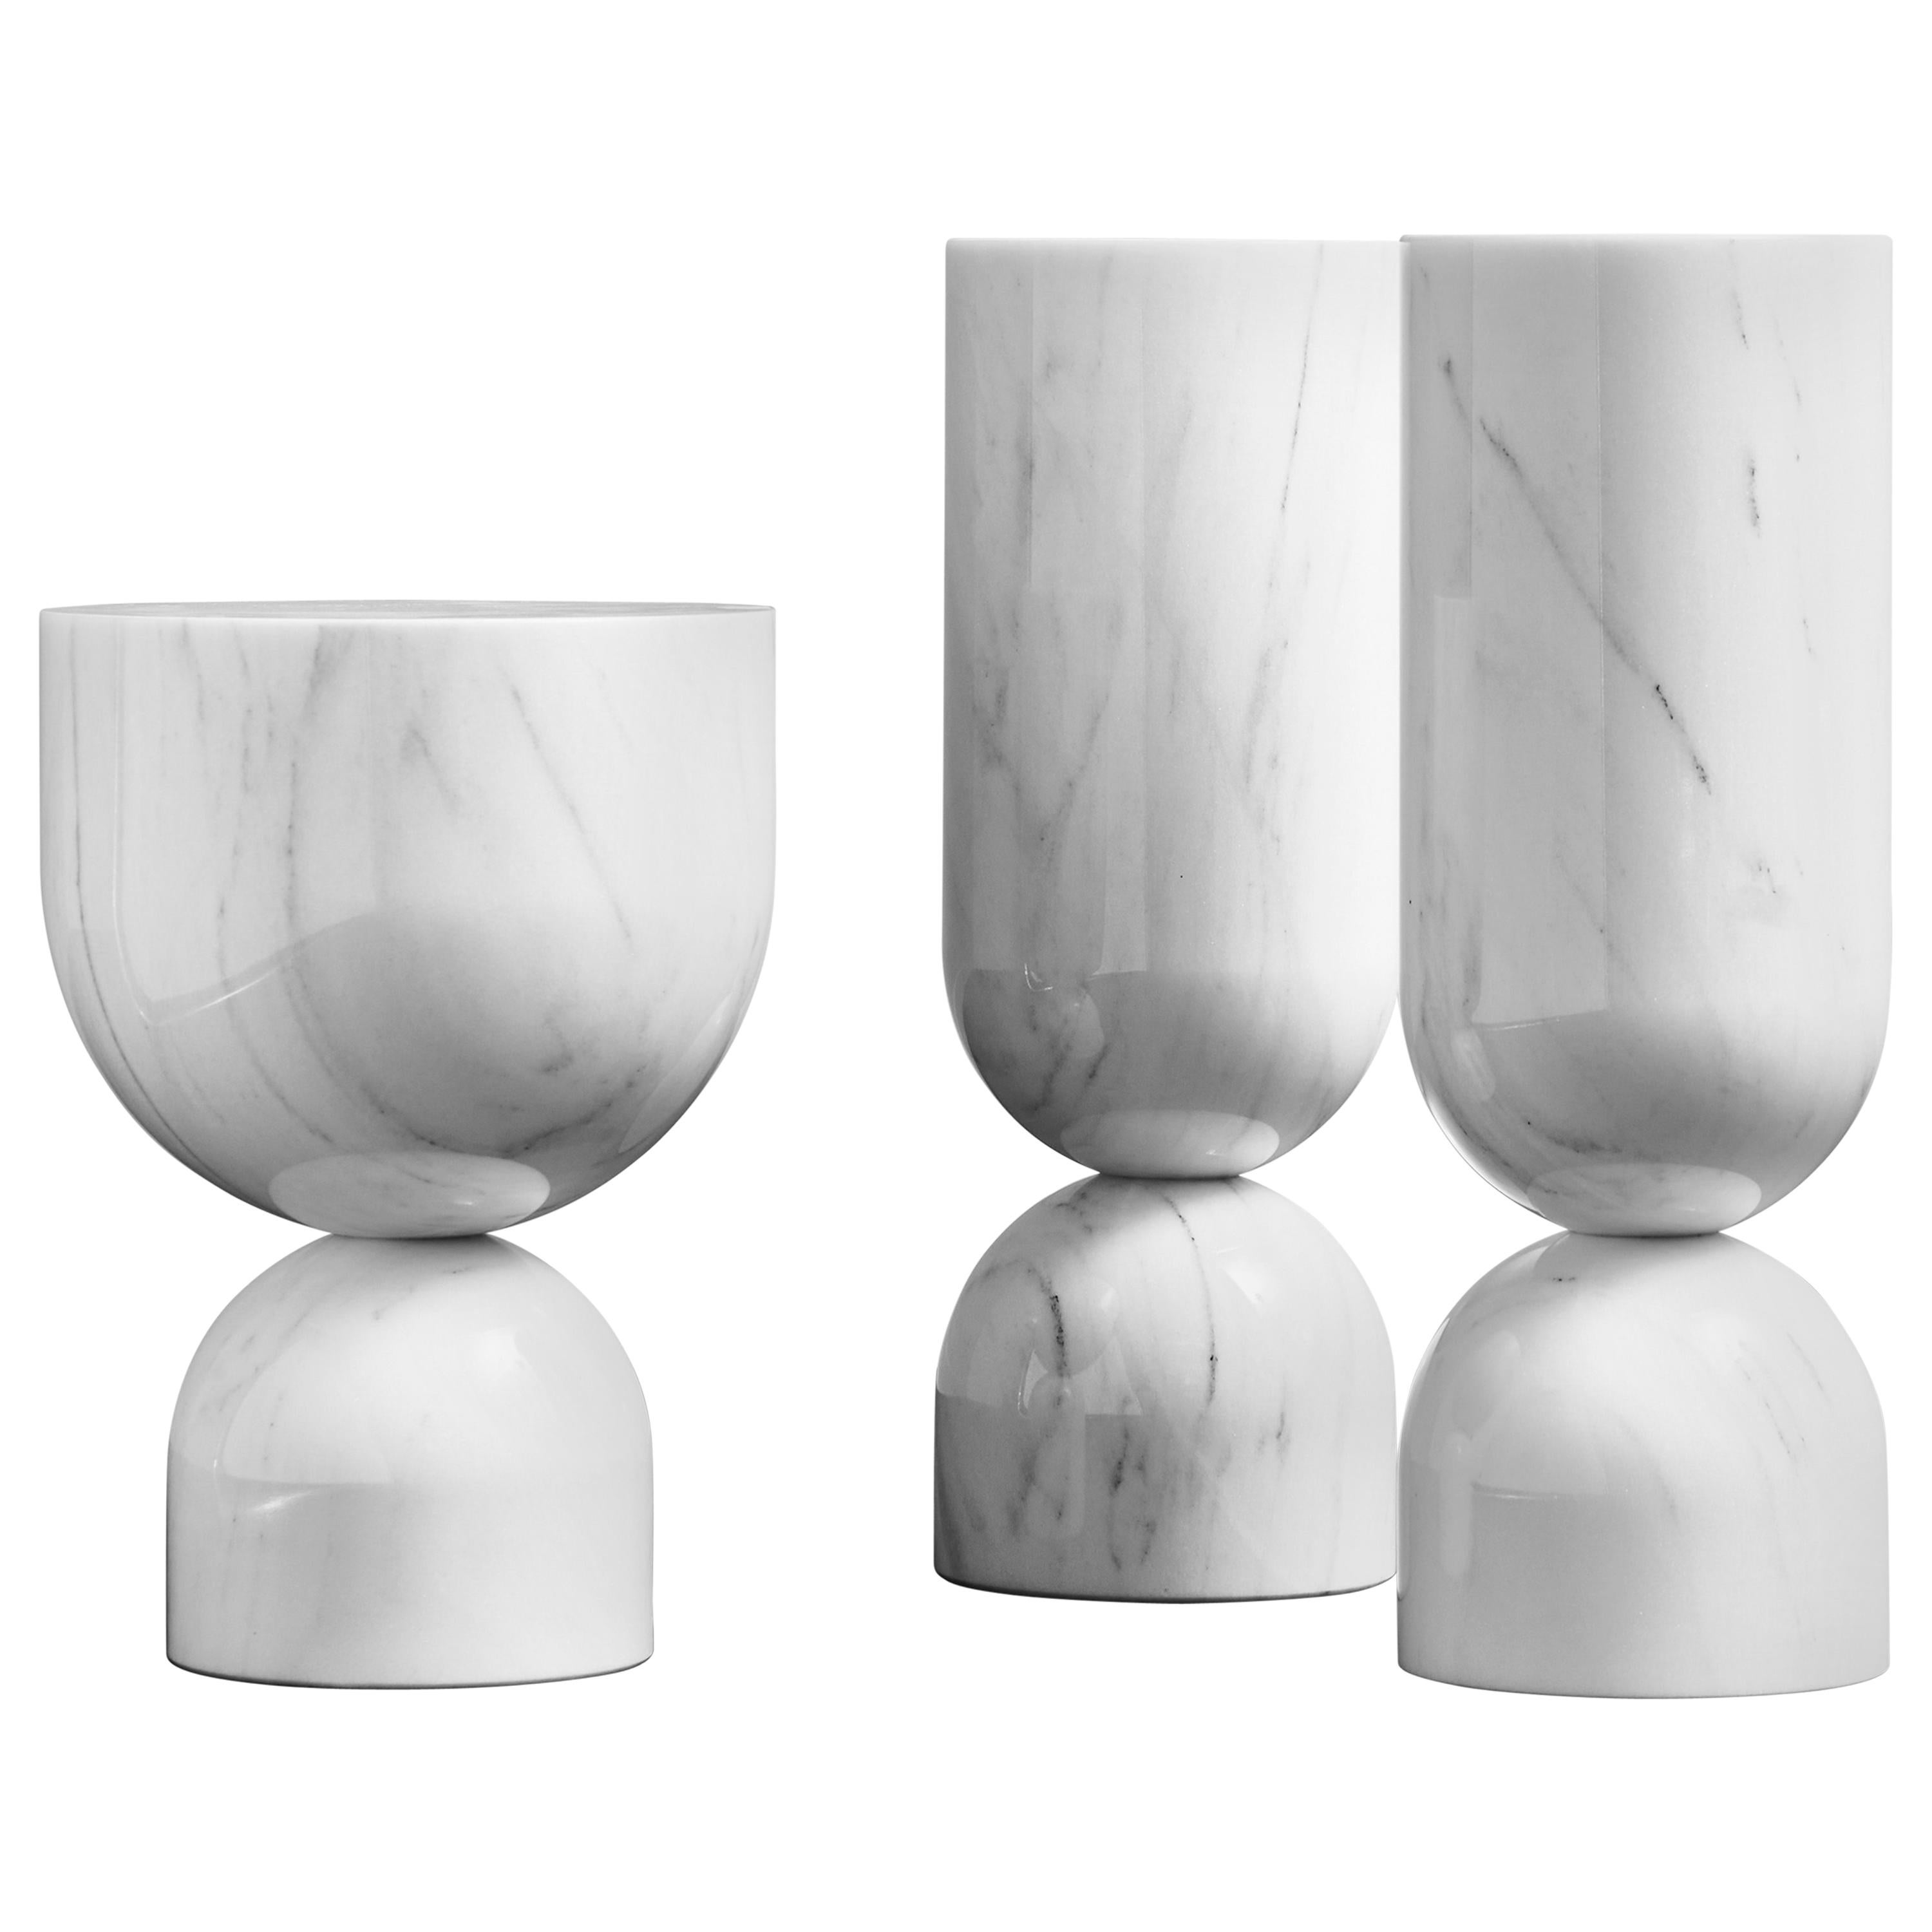 Set of 3 Marble Pedestals at Cost Price